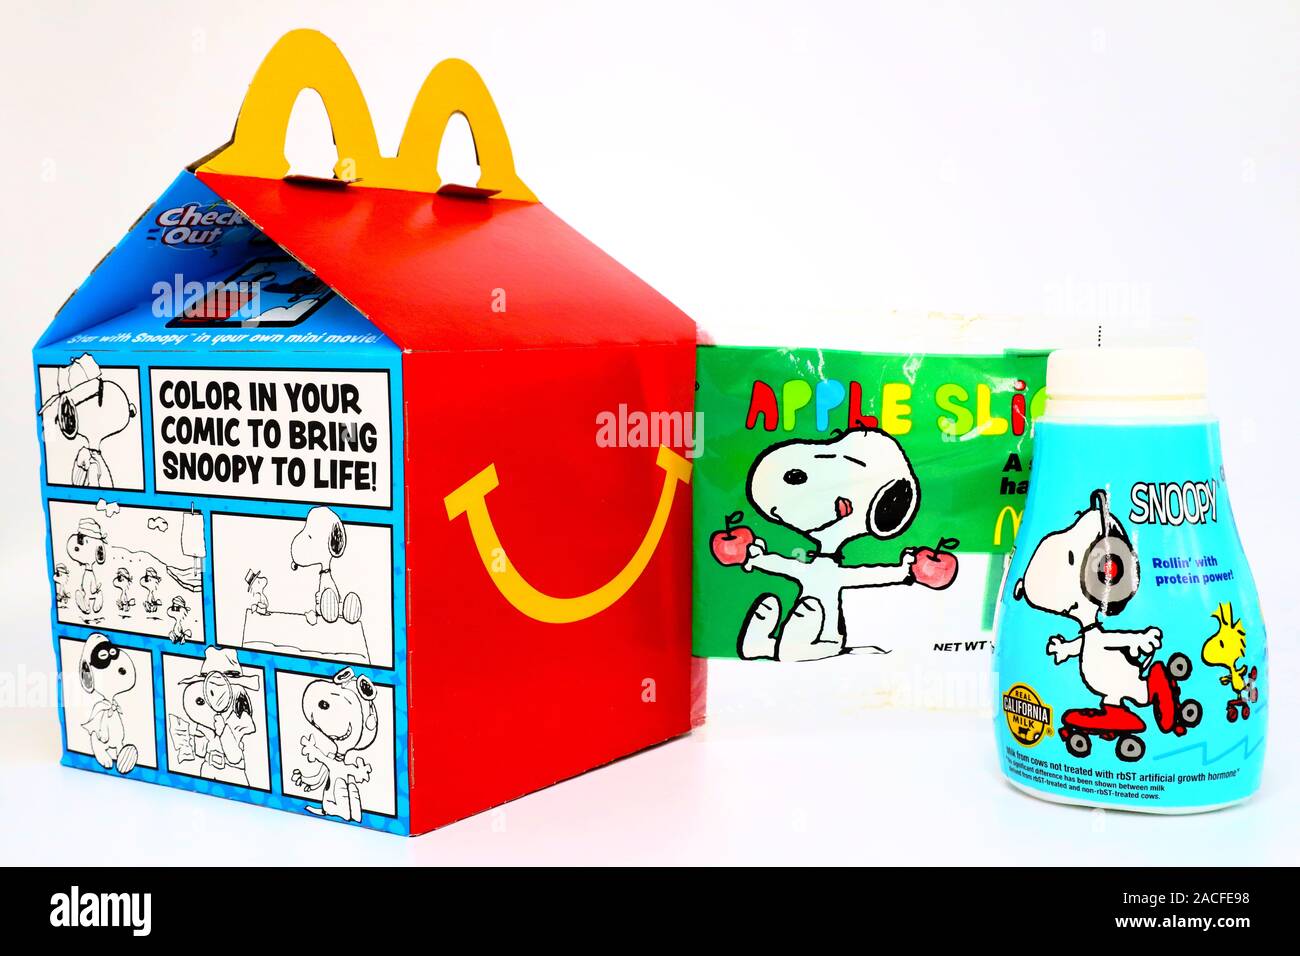 McDonald's Happy Meal cardboard box with SNOOPY a Peanuts Characters. McDonald's is a fast food restaurant chain Stock Photo